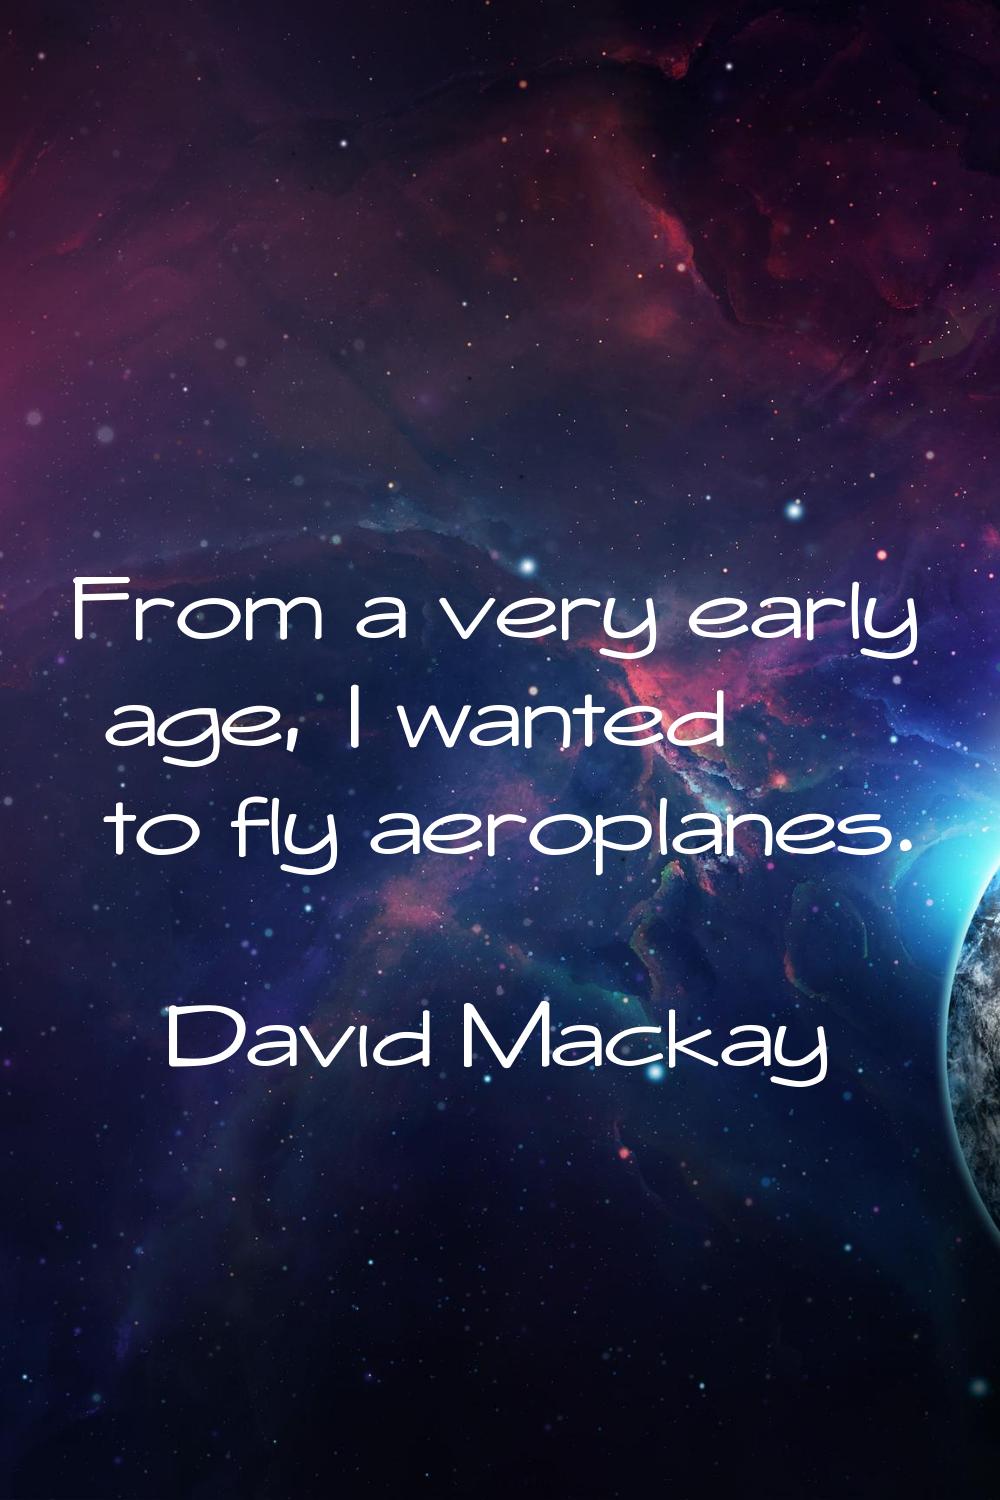 From a very early age, I wanted to fly aeroplanes.